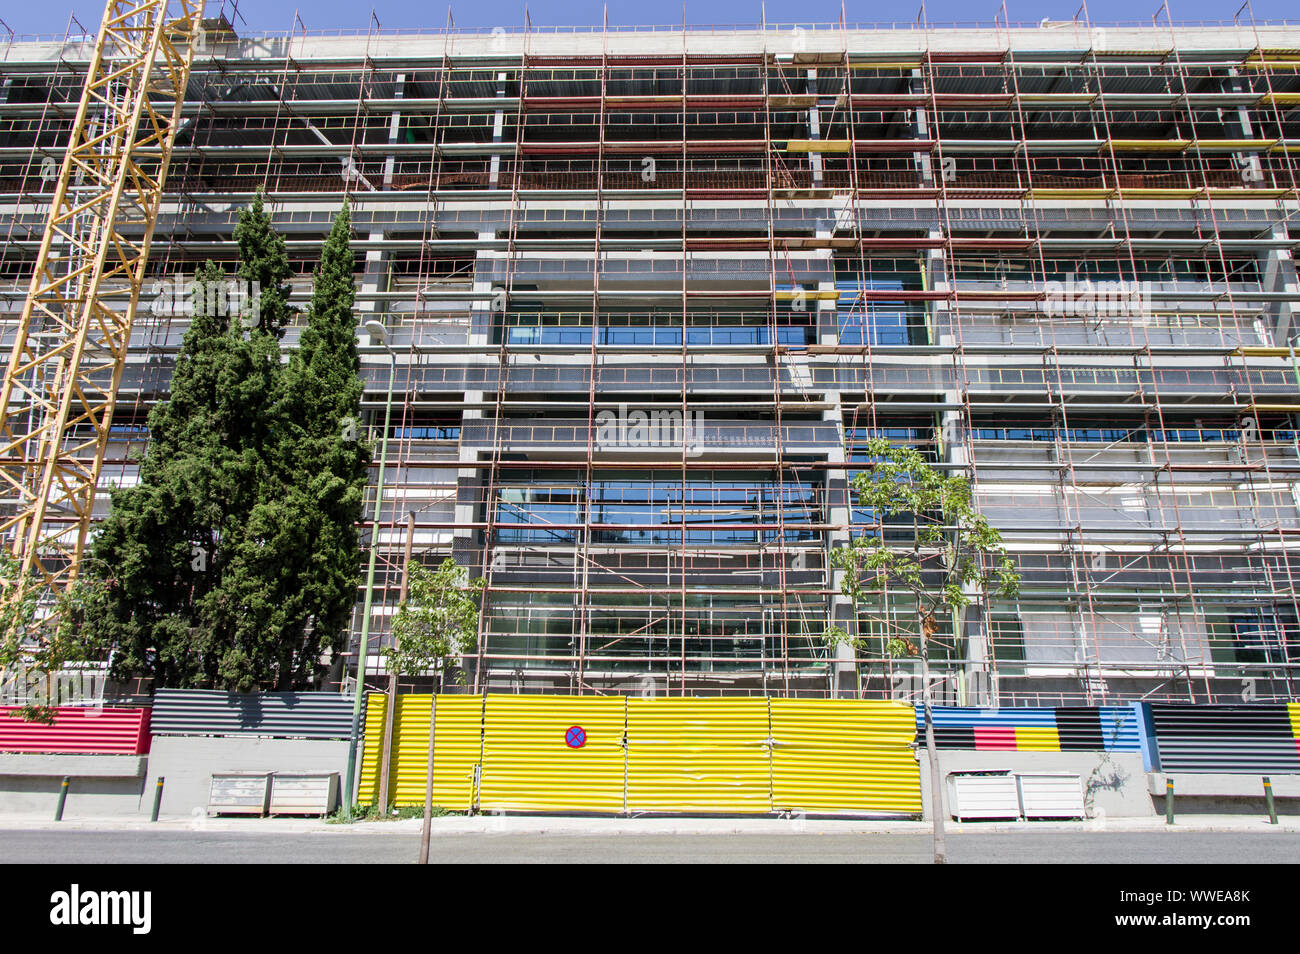 Building under renovation or construction with scaffolding Stock Photo